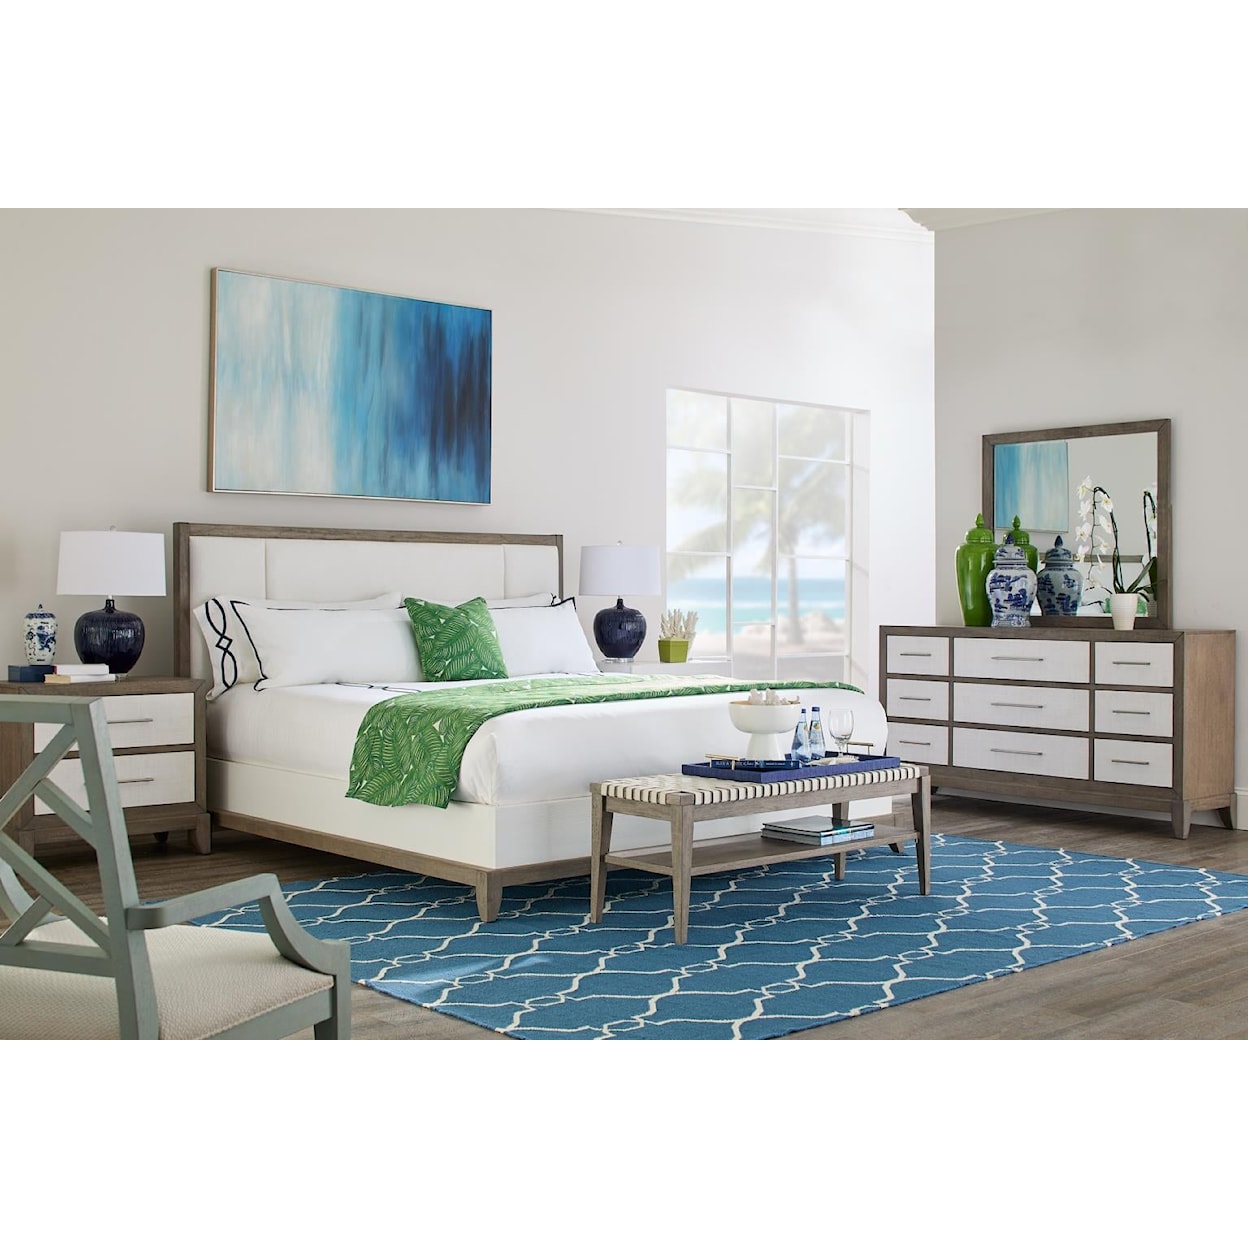 Trisha Yearwood Home Collection by Legacy Classic Staycation Open Night Table